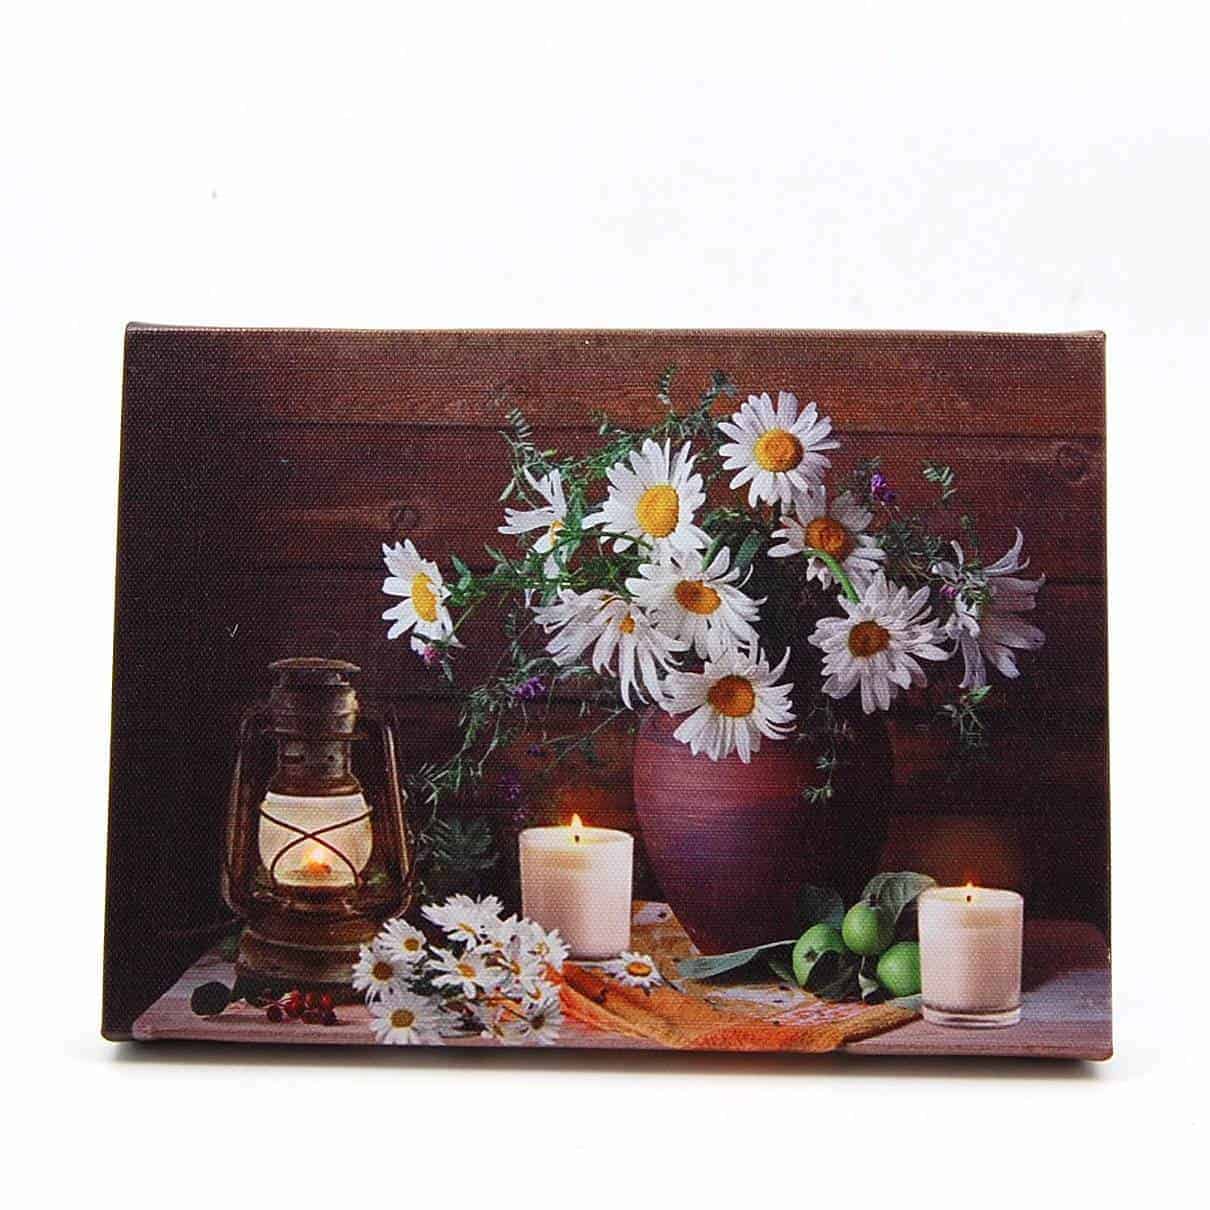 This Daisies in Vase and Candles LED Light Up Lighted Canvas Wall or Tabletop Picture Art is made with love by Premier Homegoods! Shop more unique gift ideas today with Spots Initiatives, the best way to support creators.